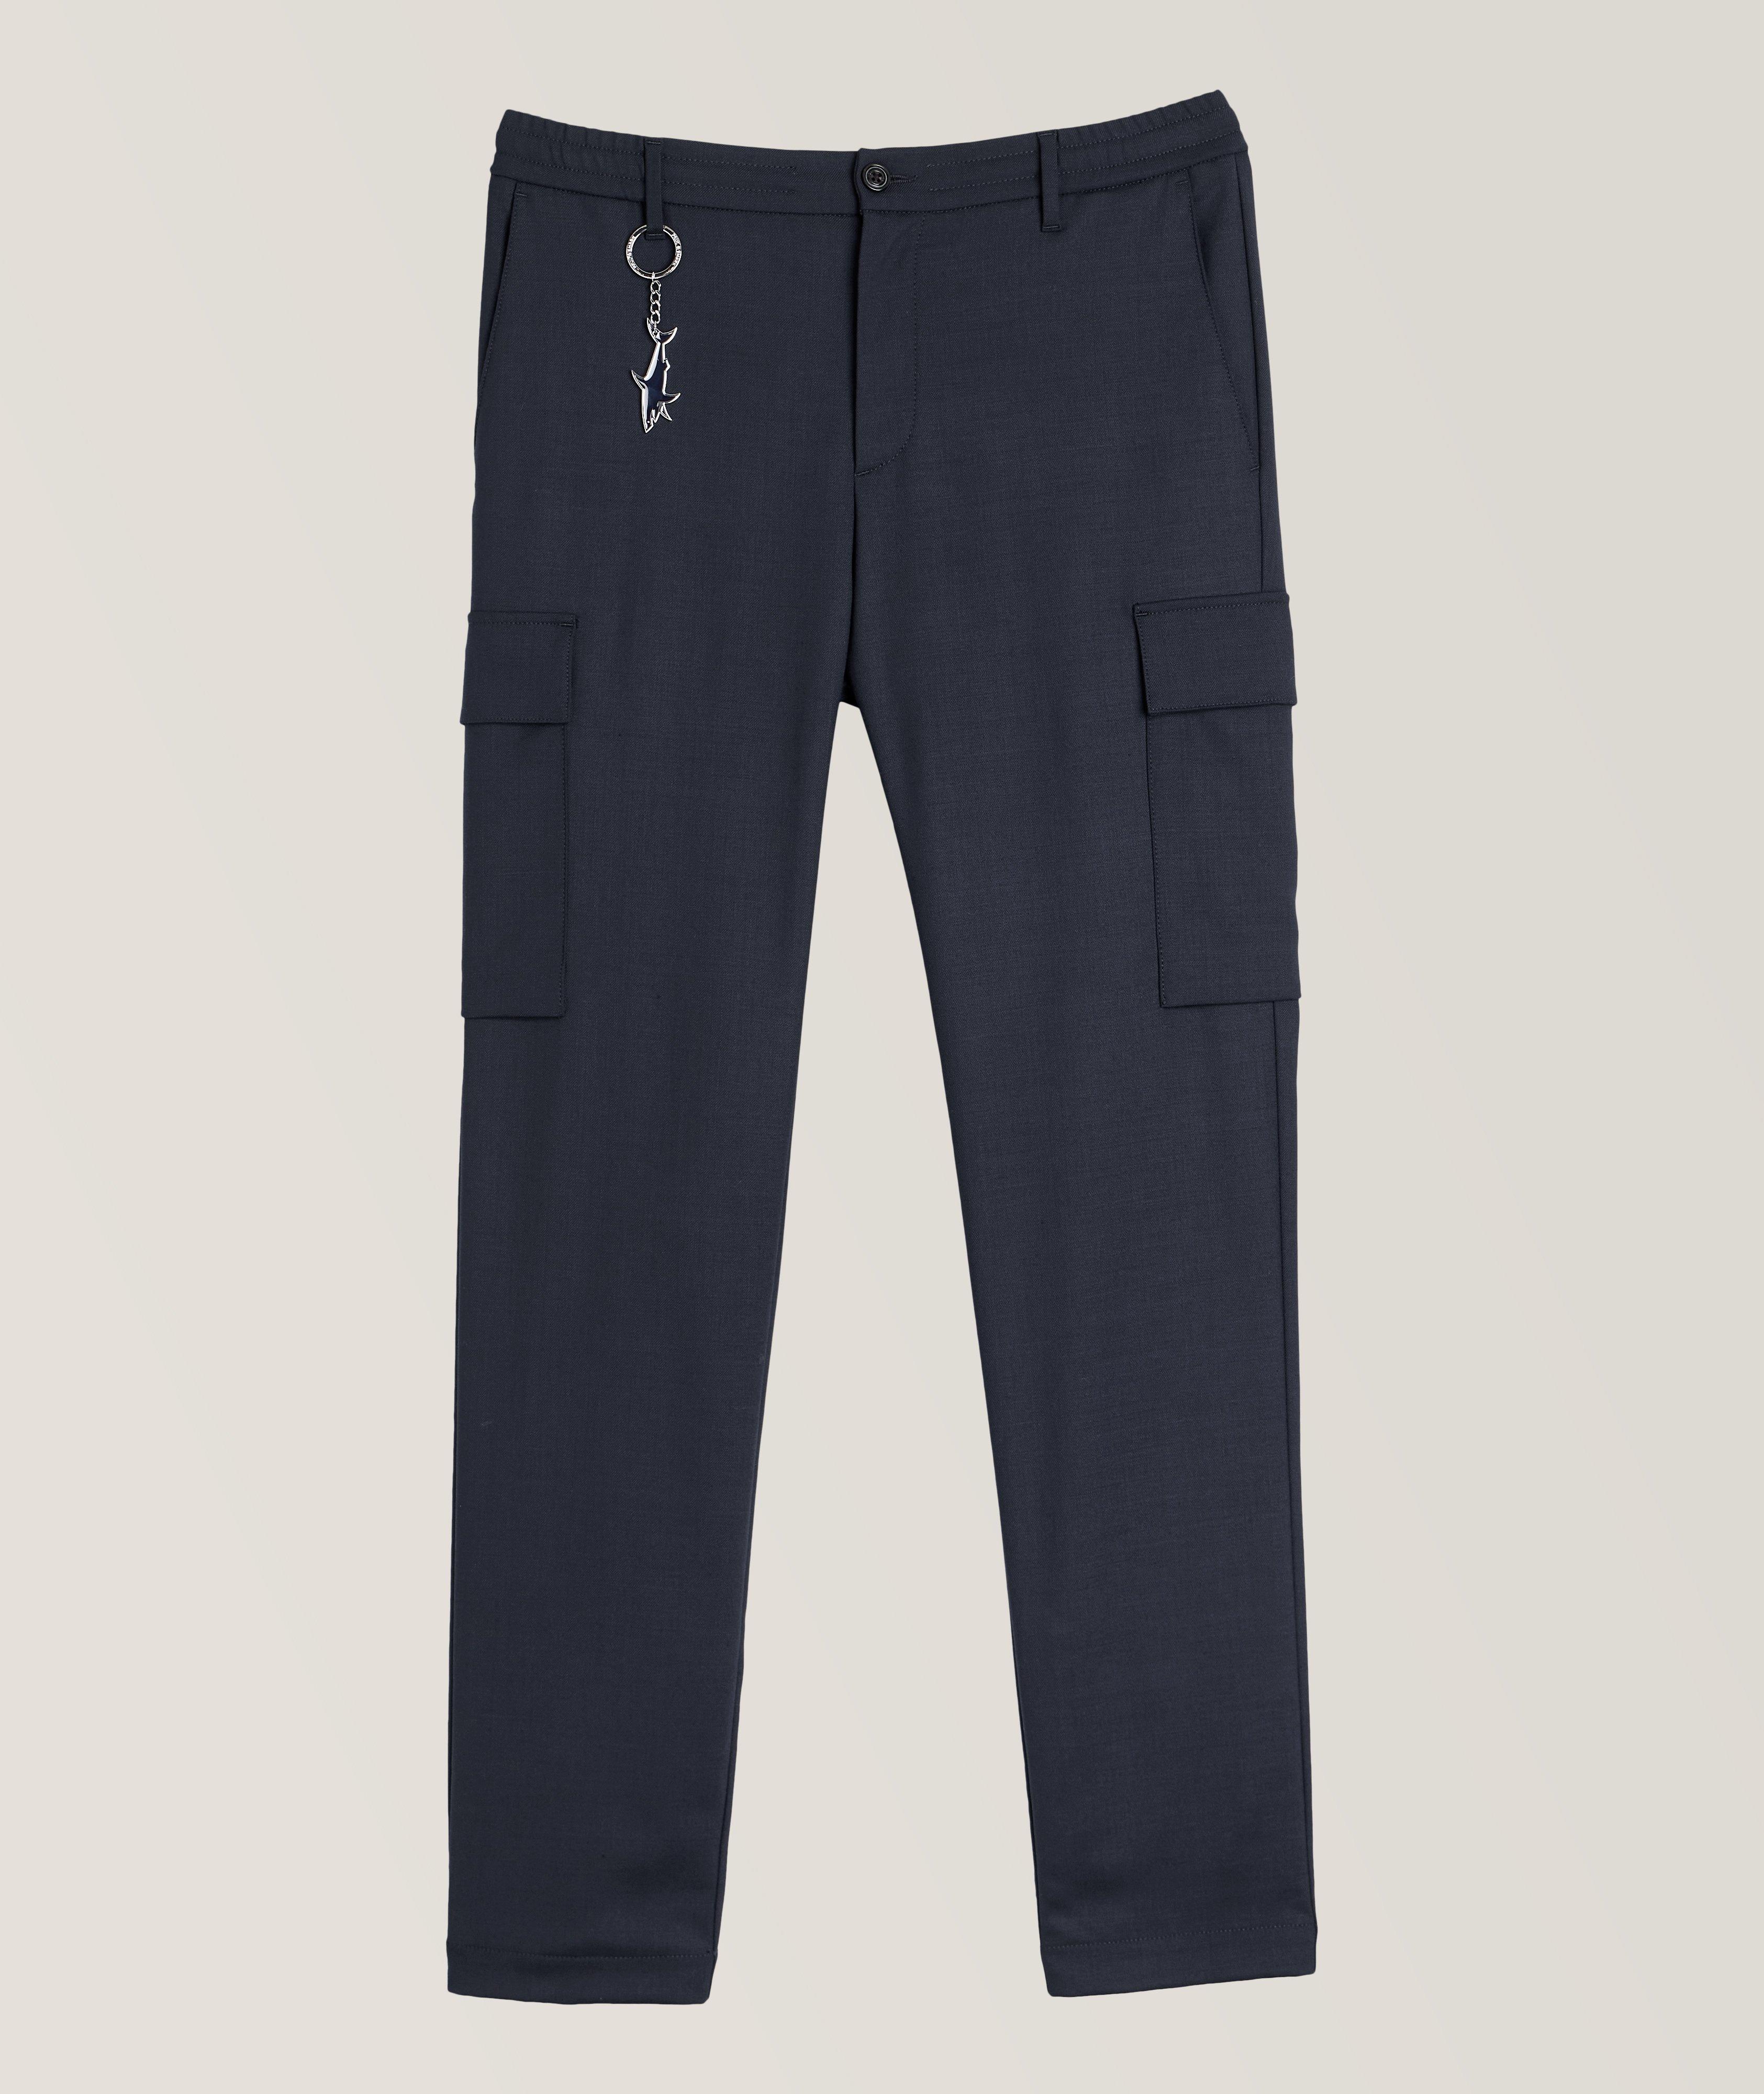 Technical Stretch Cargo Pants image 0